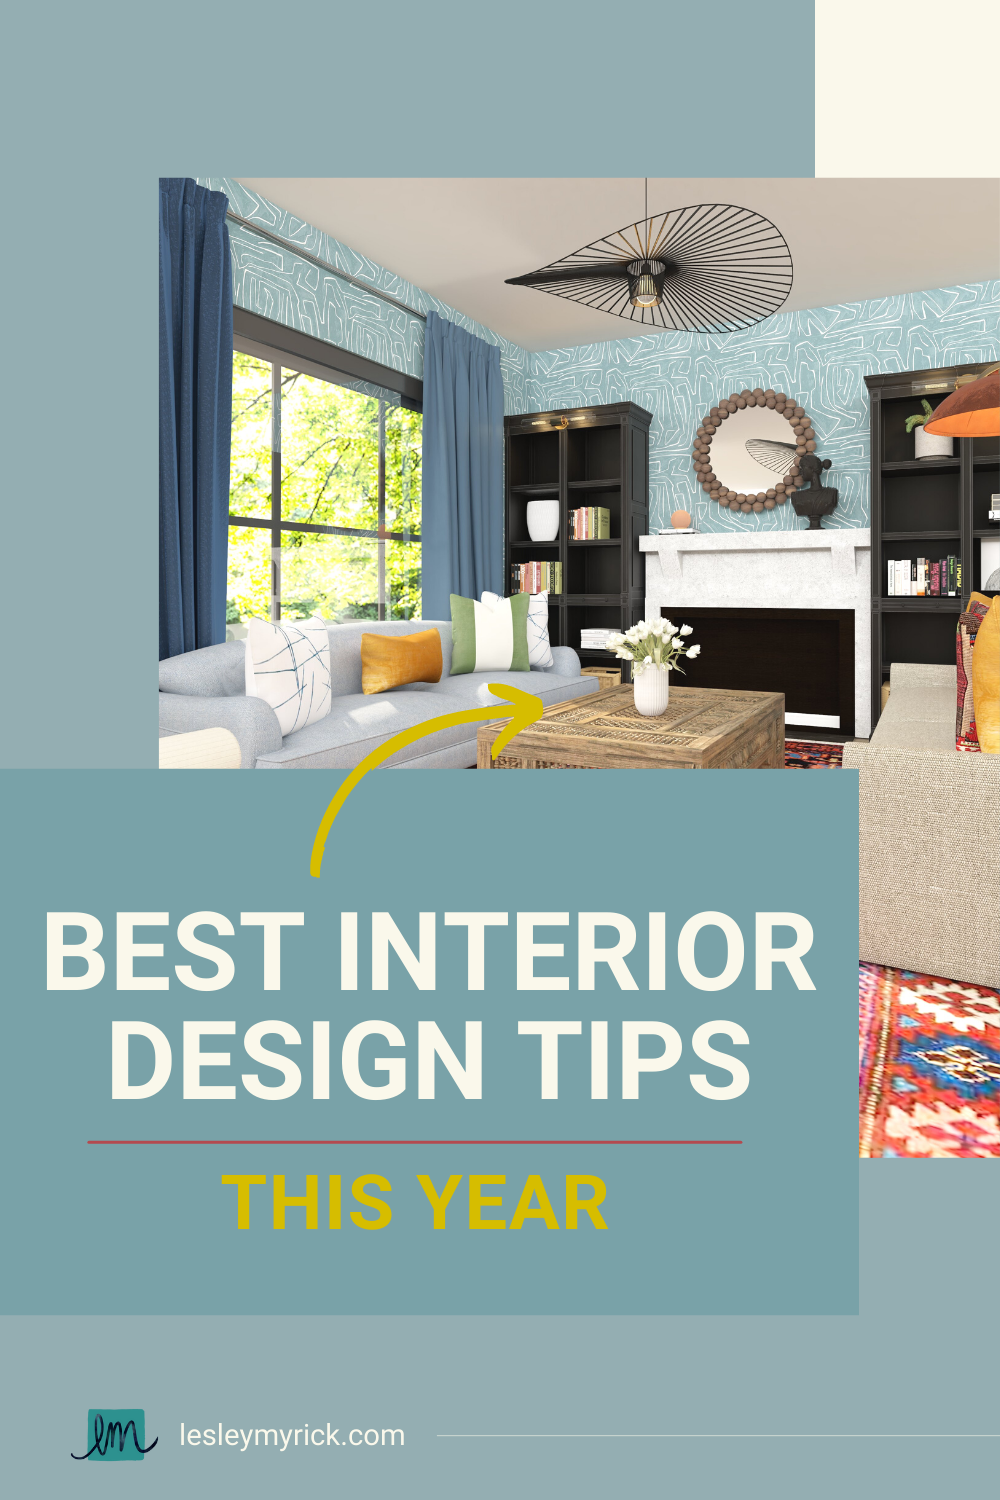 Check out the best interior design tips from interior designer Lesley Myrick. From planning your design splurges to working with an interior designer to tips on remodeling your kitchen, we've covered a lot to help you bust out of a boring home! 